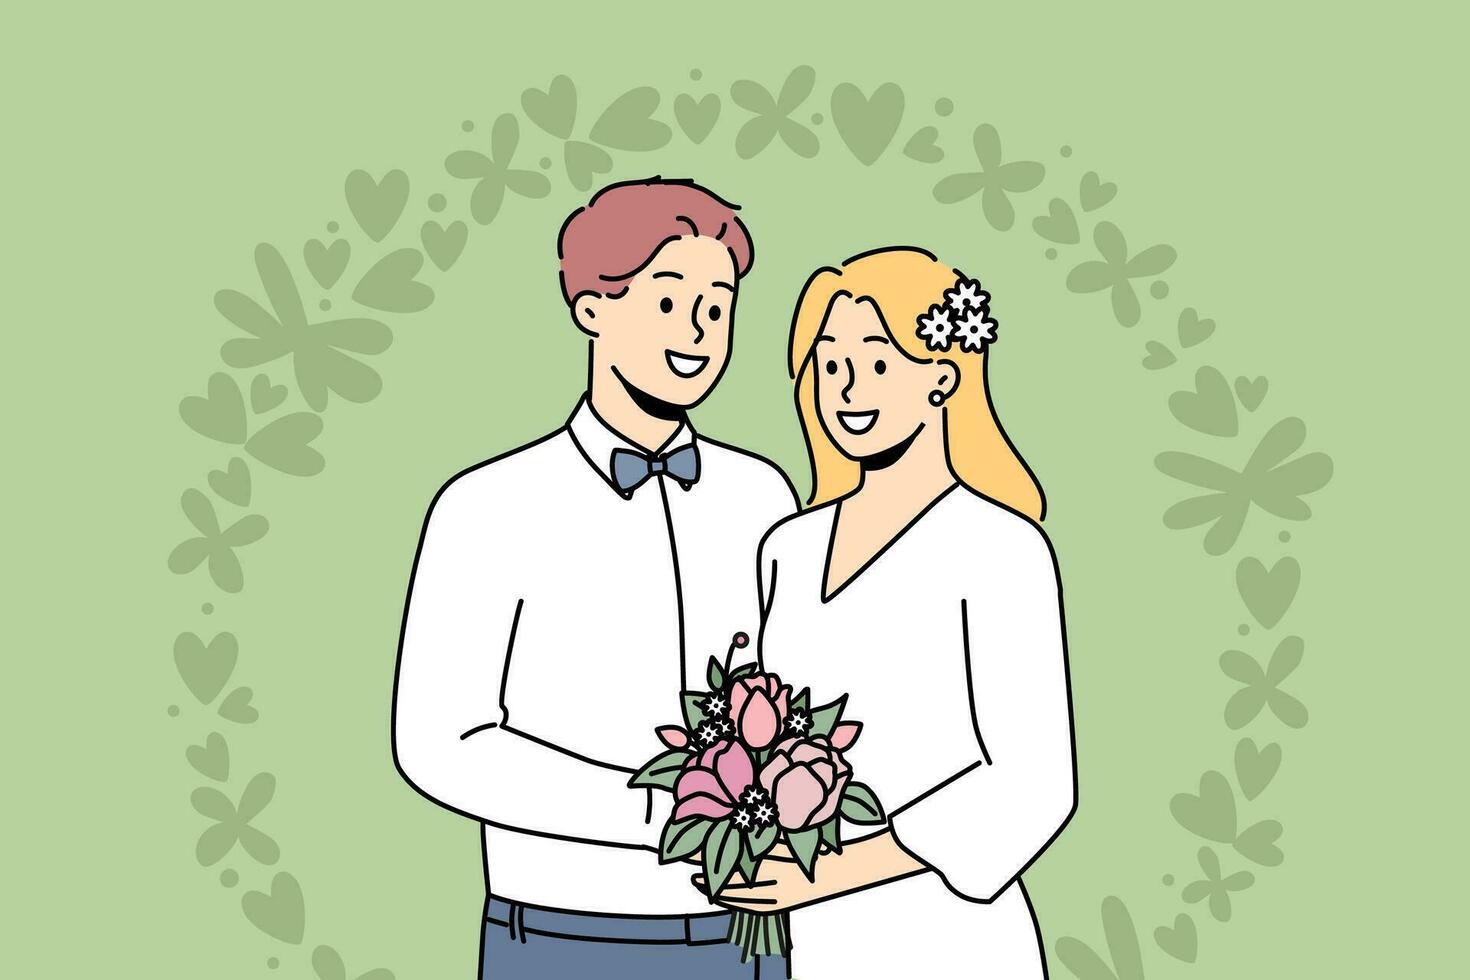 Smiling bride and groom standing near wedding floral arch during ceremony. Happy couple enjoy marriage celebration. Vector illustration.